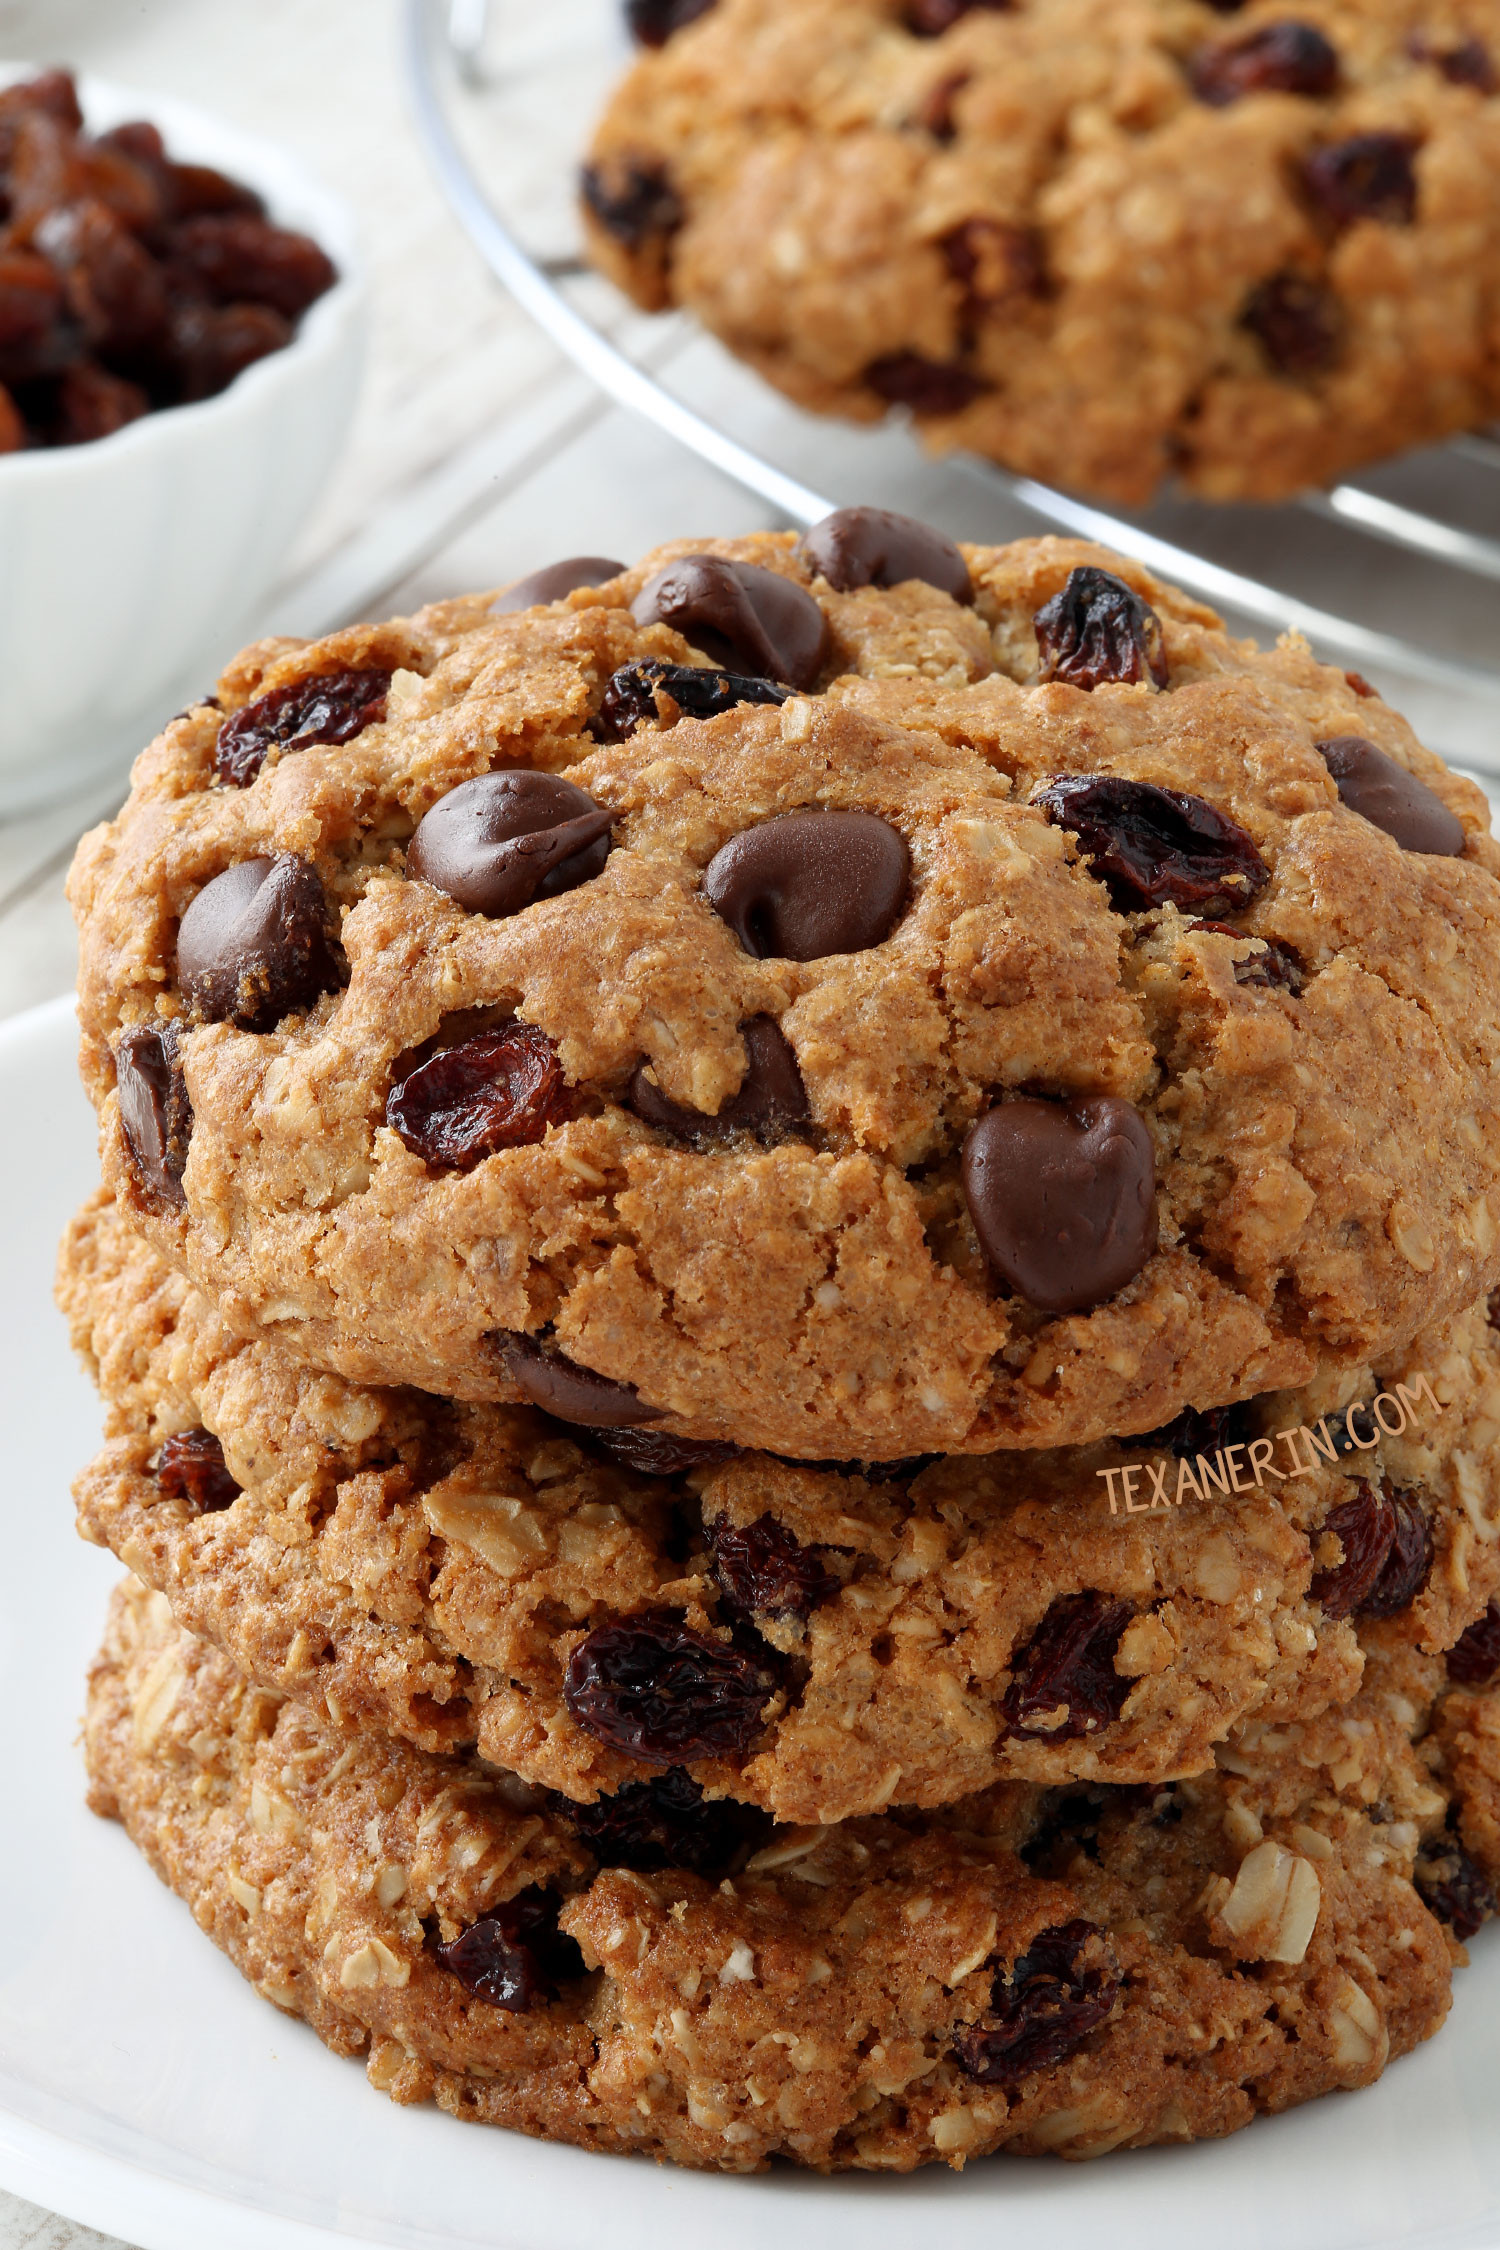 Gluten Free Oatmeal Cookie Recipes New 20 Gluten Free Cookies You Ll Want to Inhale Texanerin